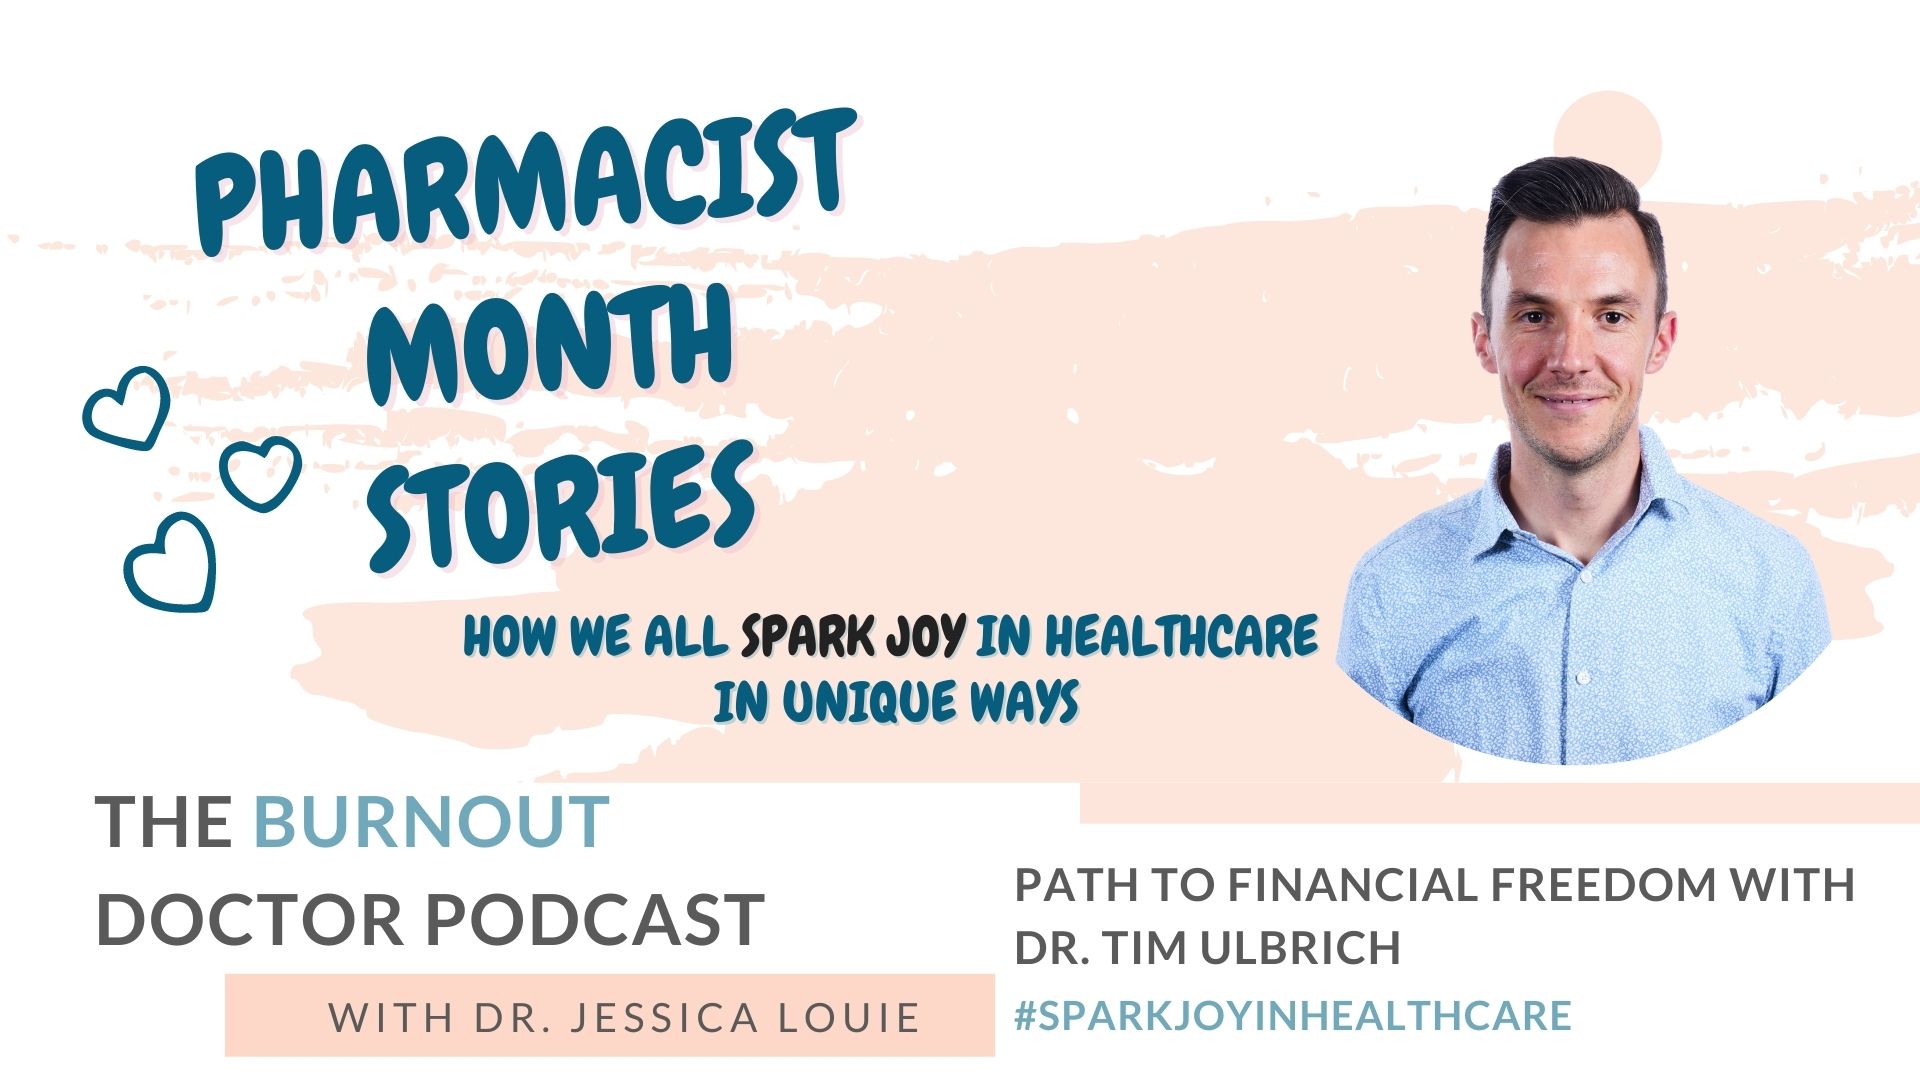 Dr. Tim Ulbrich PharmD on The Burnout Doctor Podcast with Dr. Jessica Louie. Path to financial freedom and Your Financial Pharmacist. Pharmacist Burnout stories during Pharmacists Month.